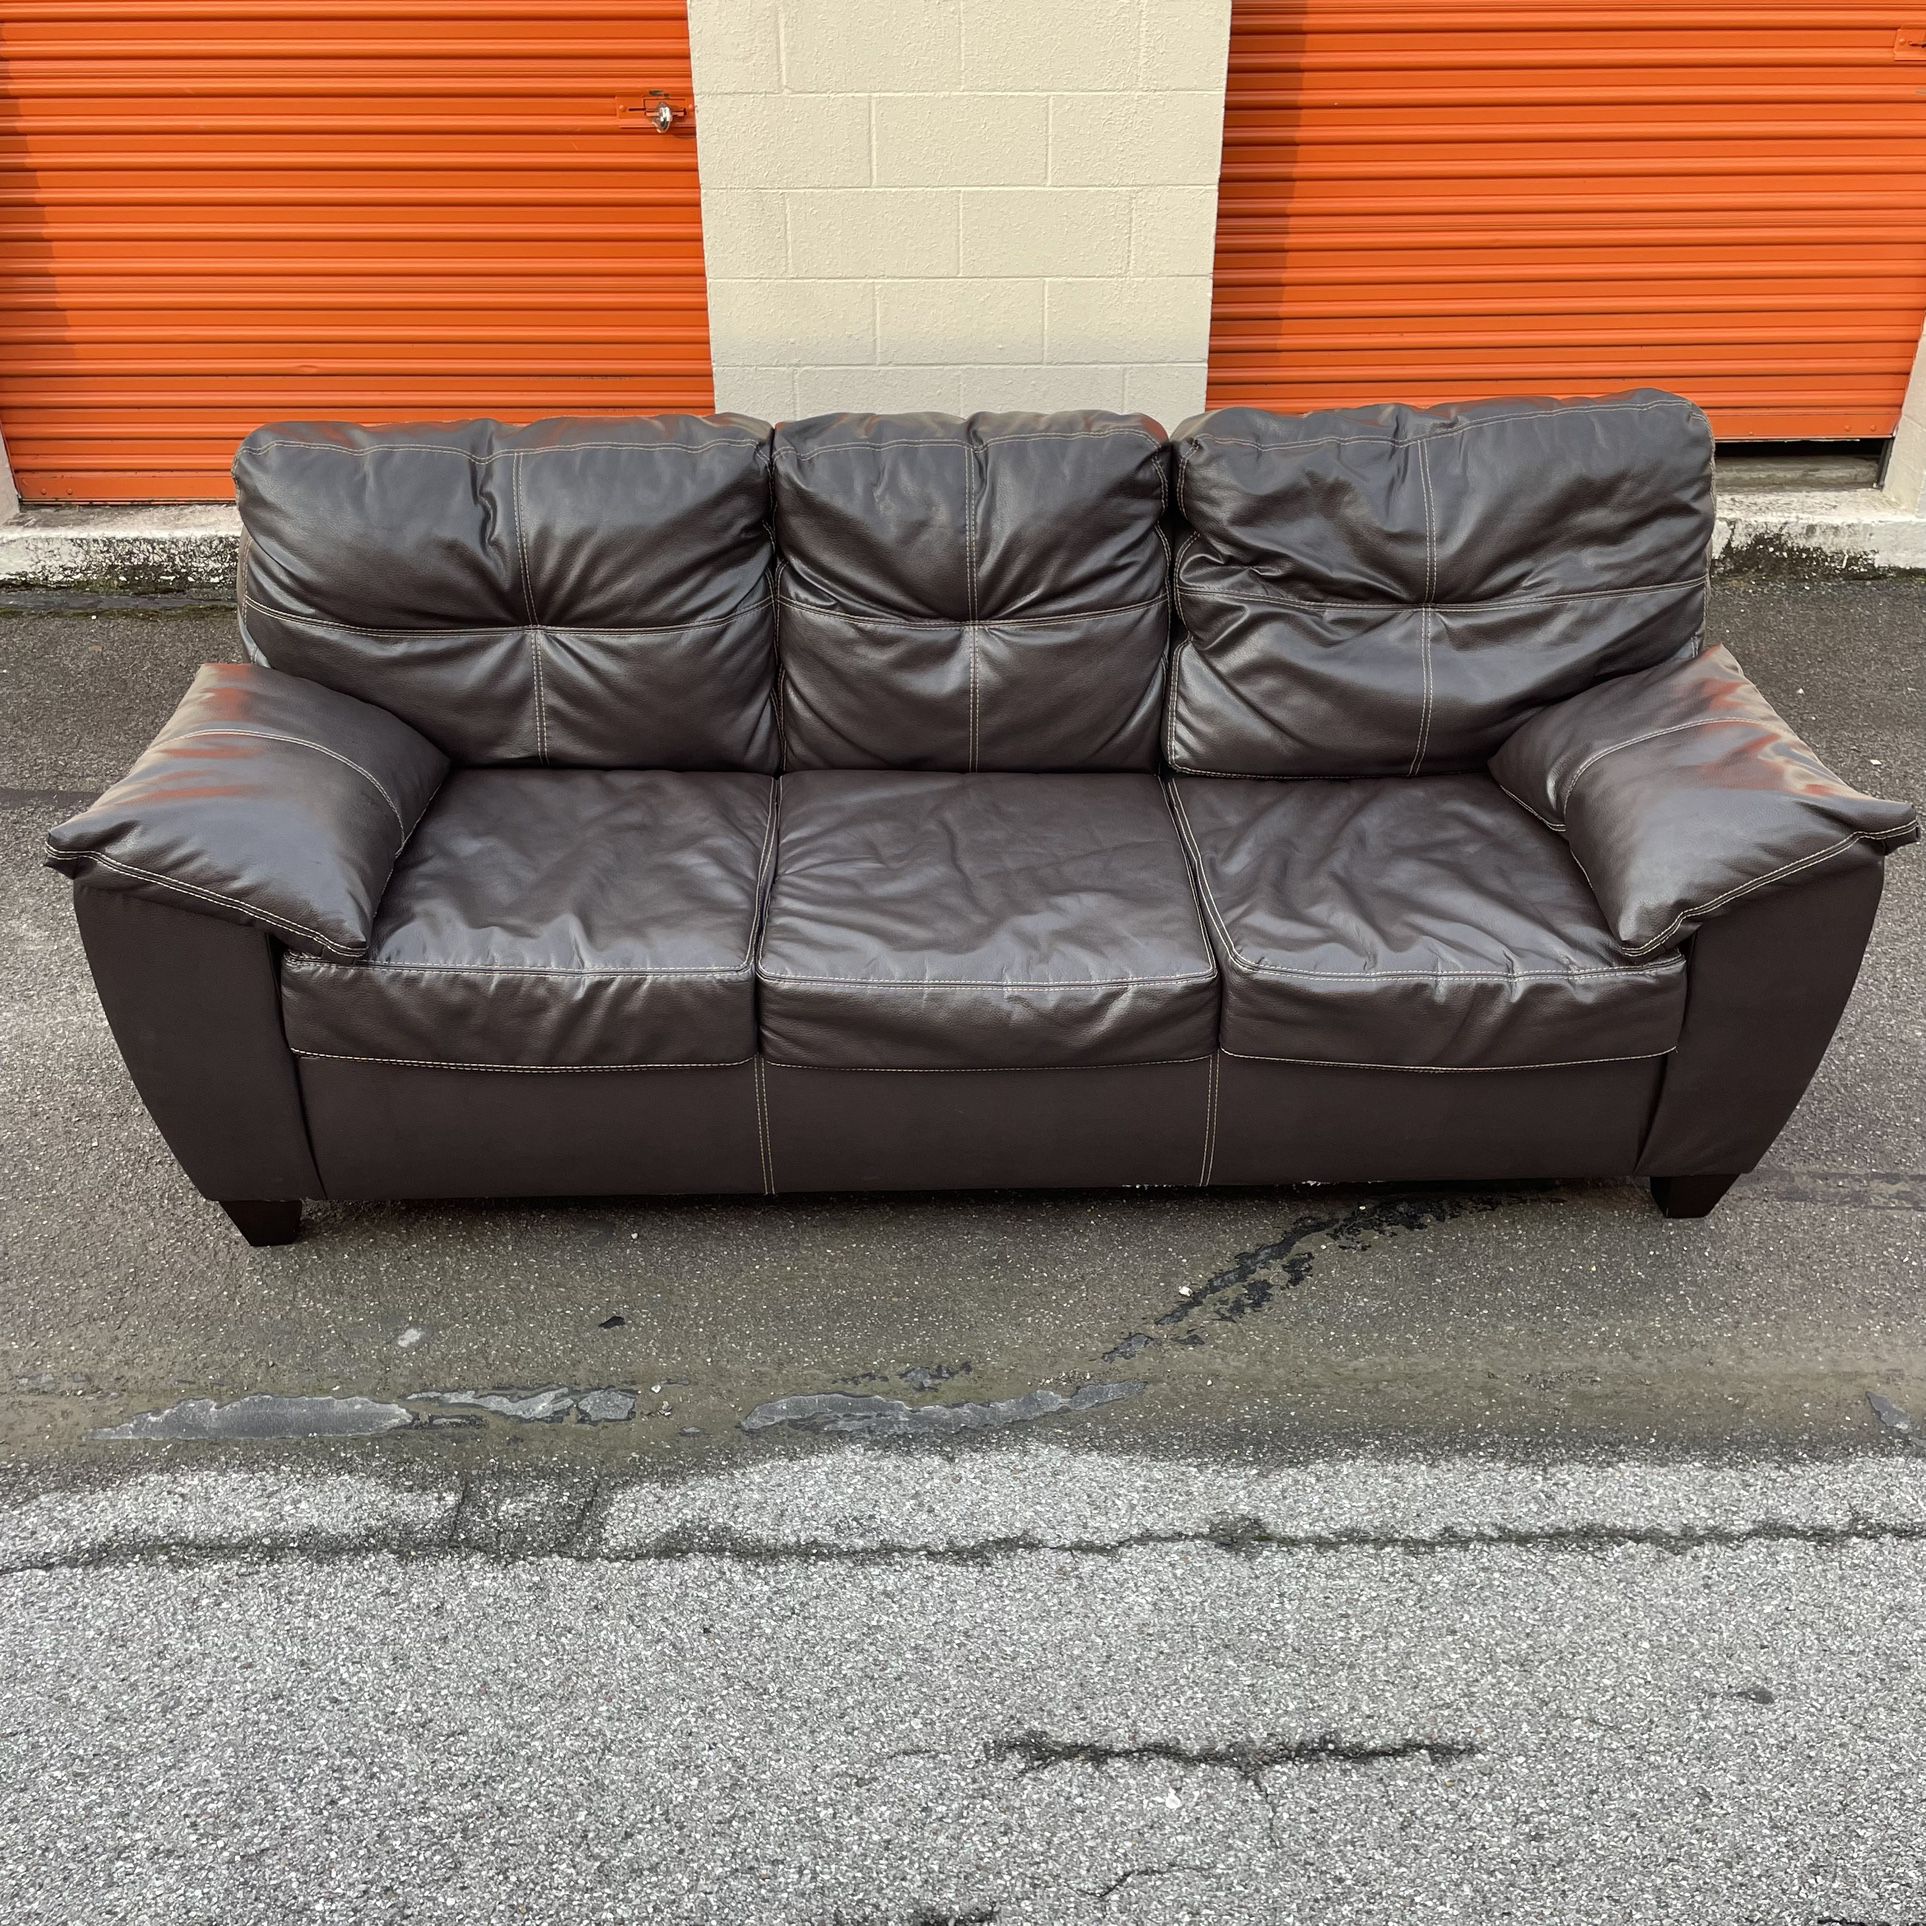 Beautiful Dark Brown Leather Couch In (Great Condition) 🟫🟫